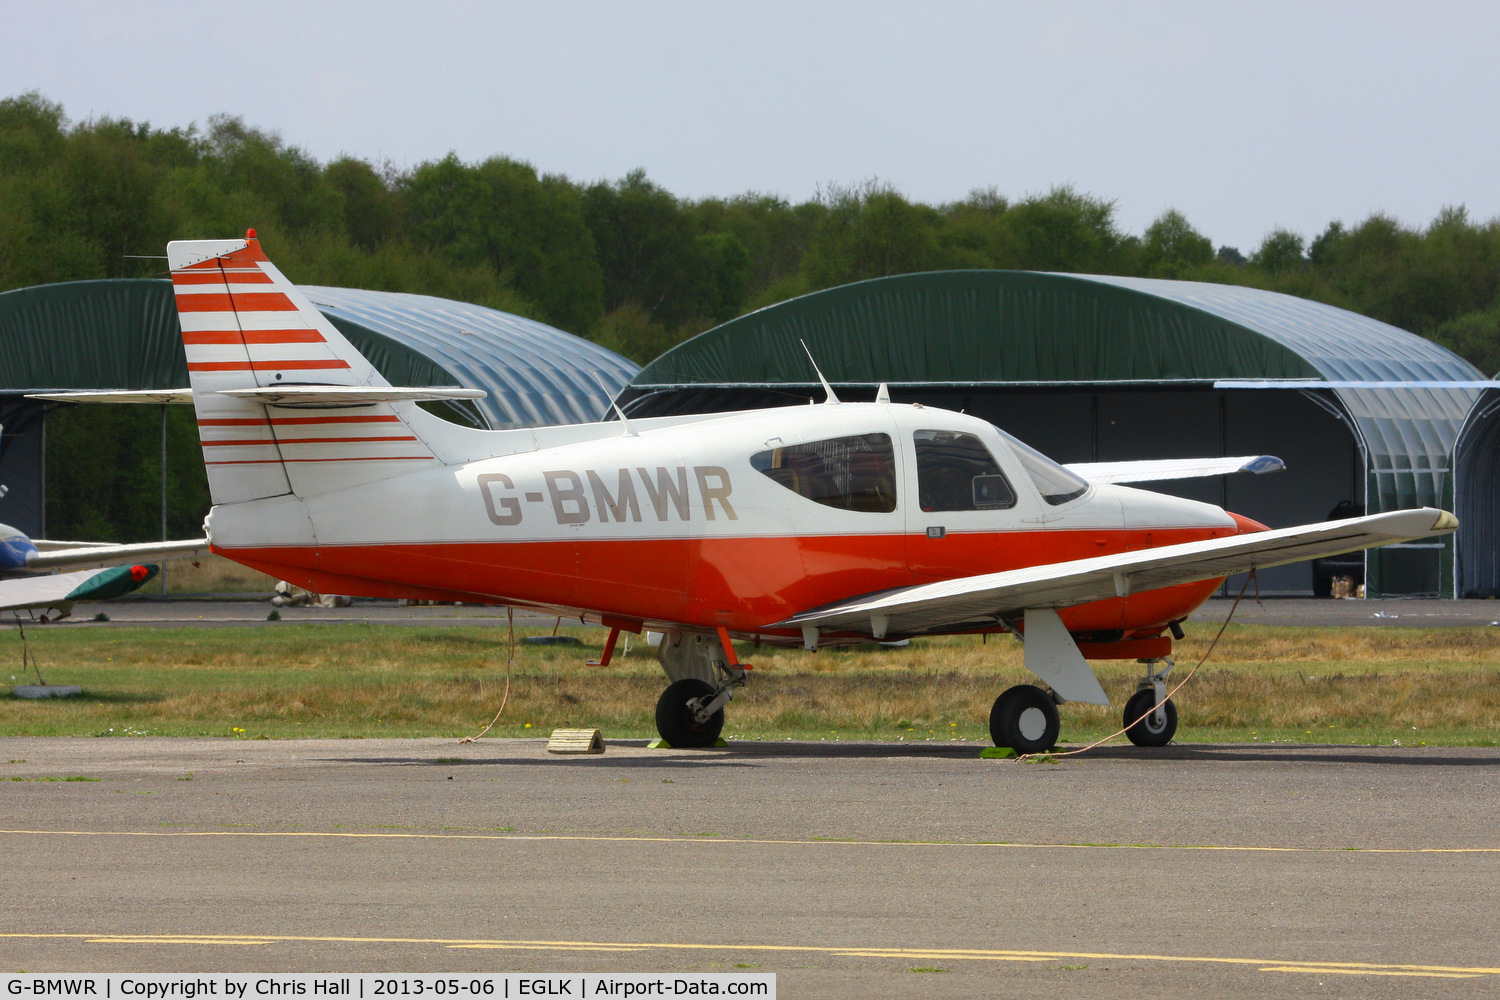 G-BMWR, 1975 Rockwell International 112 Commander C/N 365, privately owned